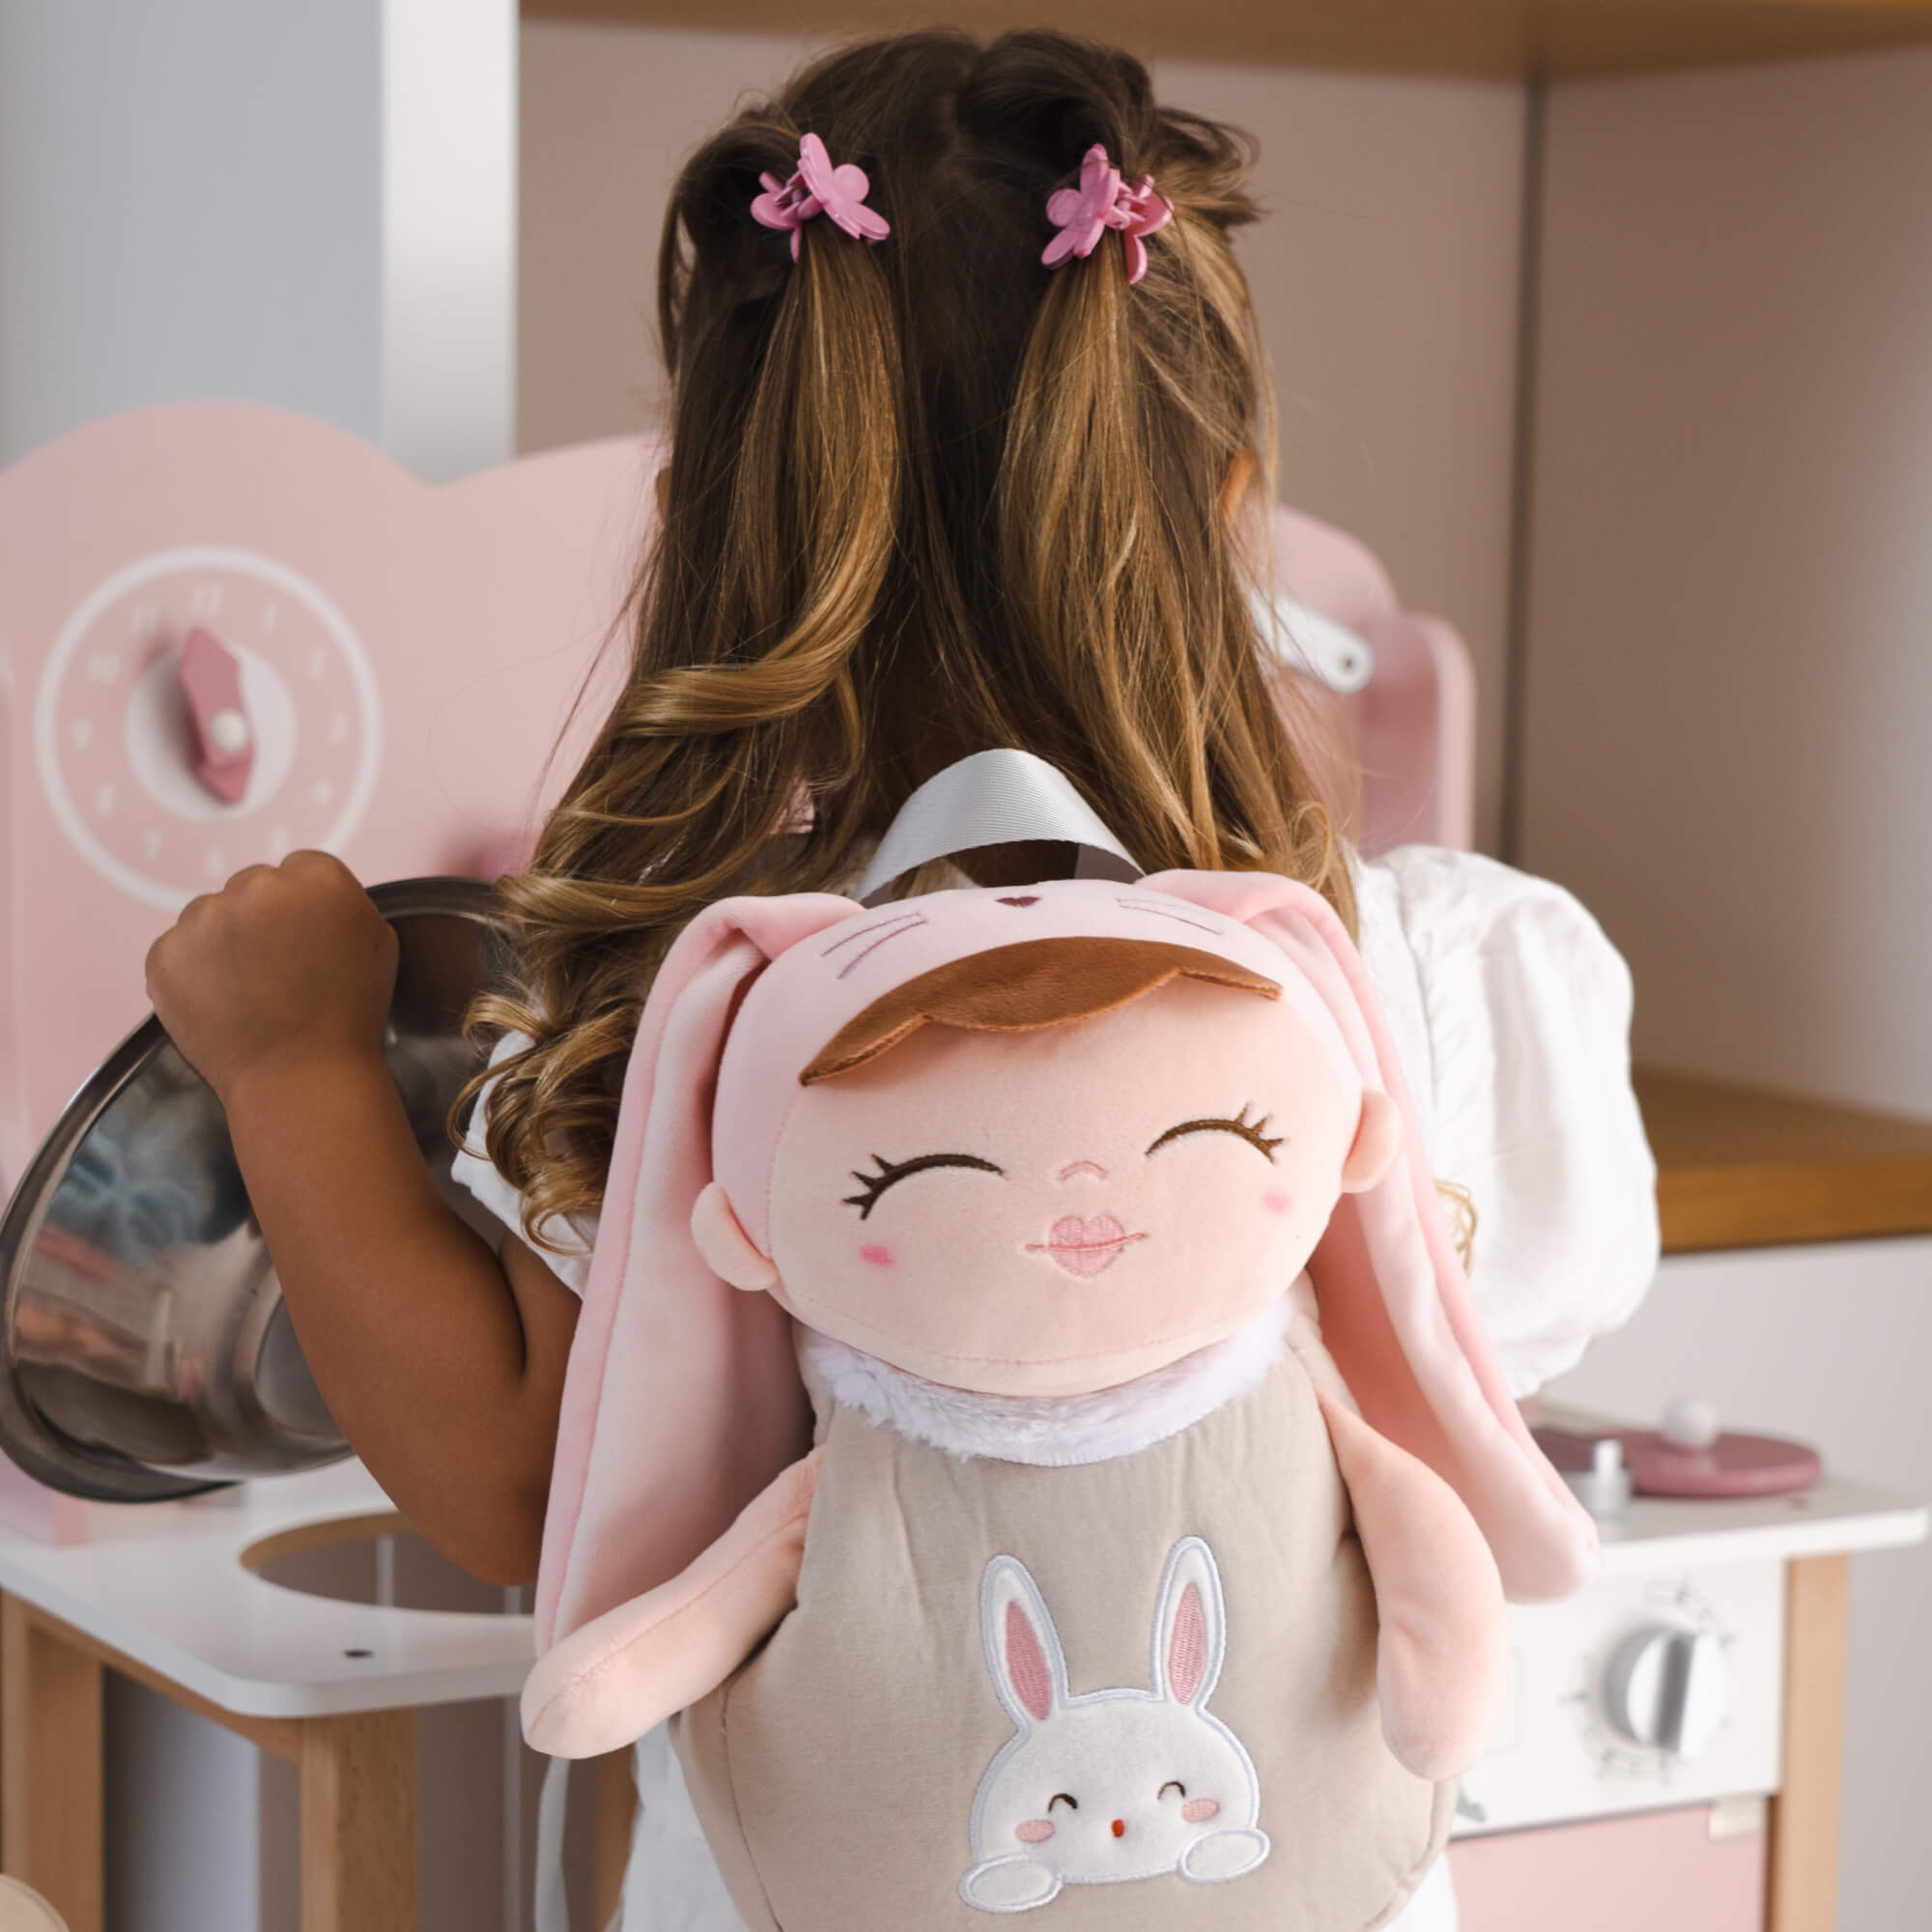 Child carrying Dreambaby toddler super soft rabbit backpack